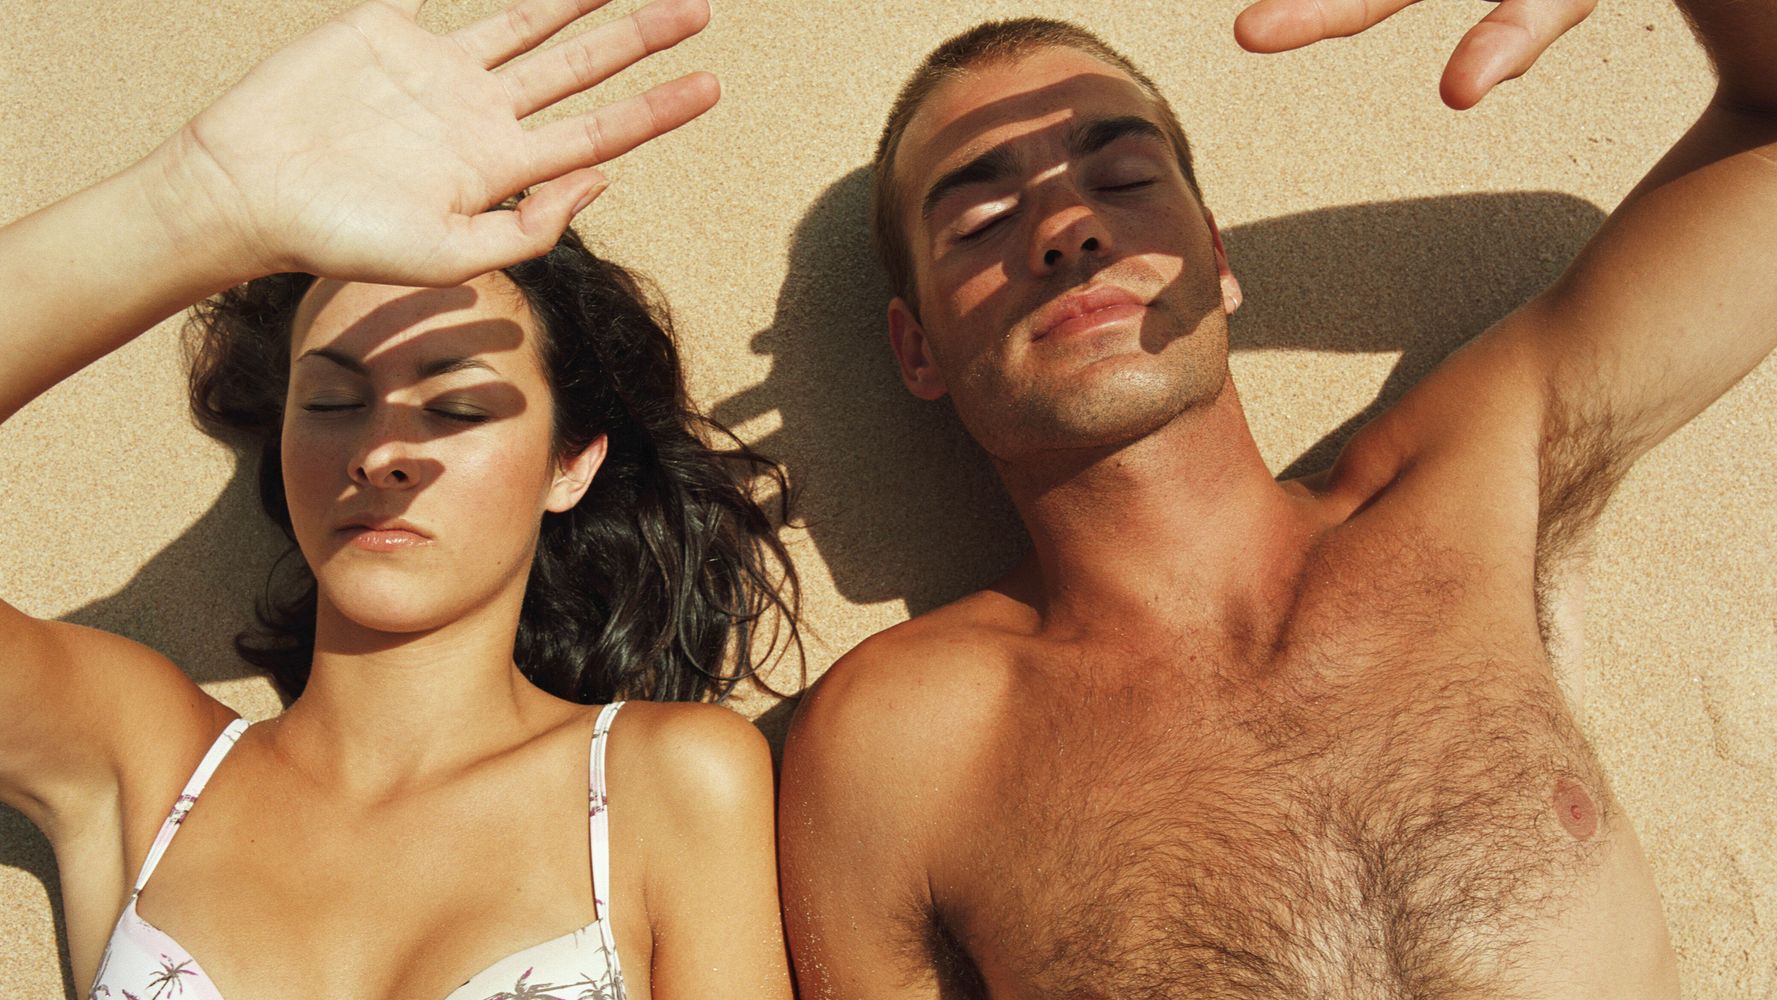 Do You Need To Wear More Sunscreen On Super Hot Days?